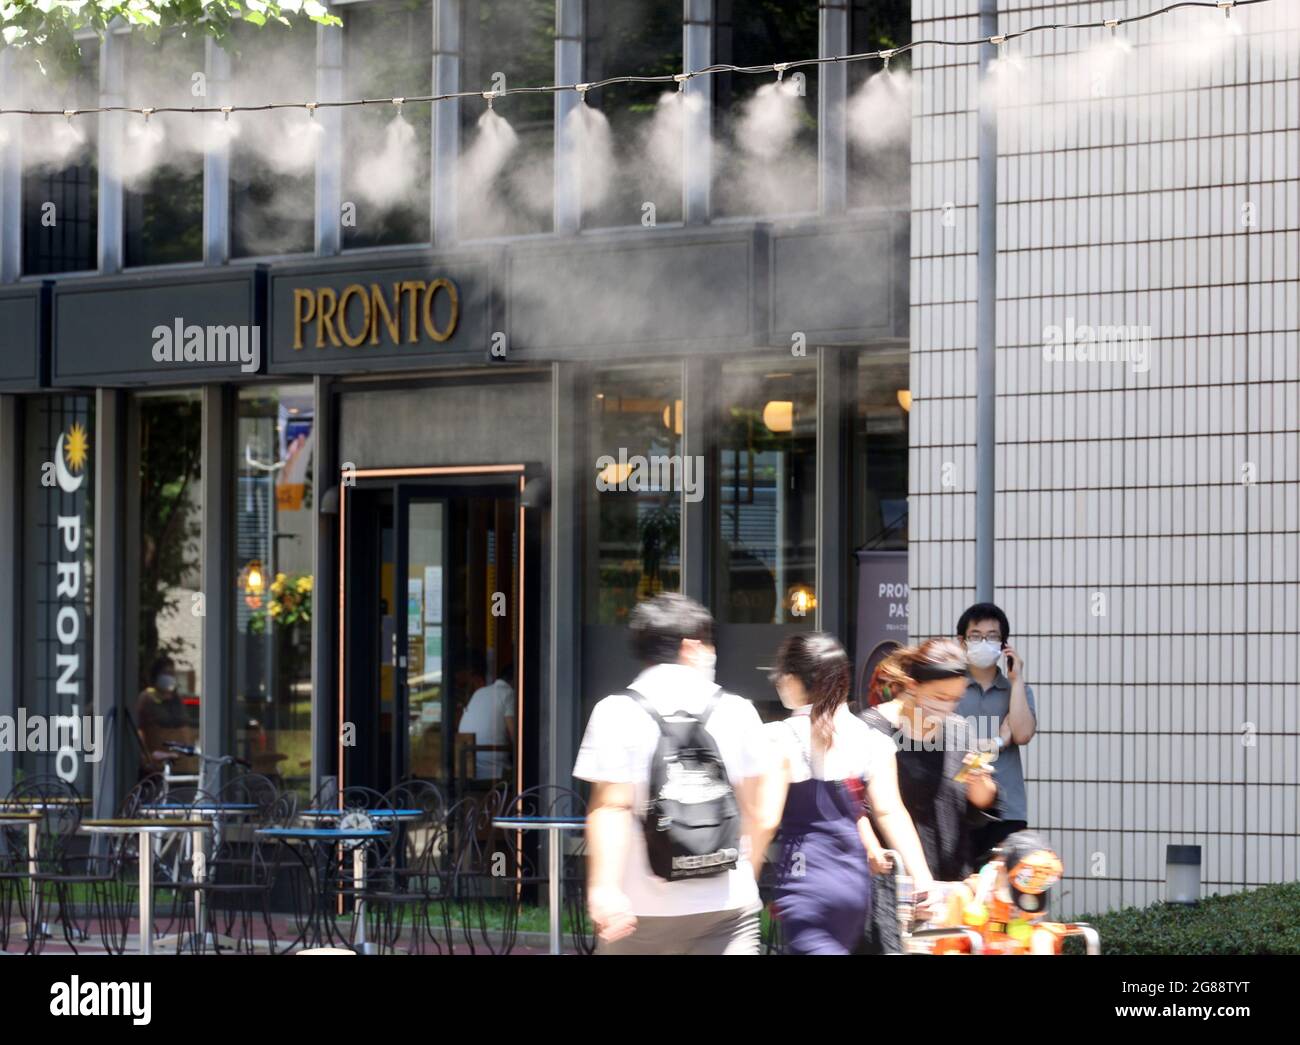 July 18, 2021, Tokyo, Japan - Pedestrians get water mist shower to cool down in Tokyo on Sunday, July 18, 2021. Tokyo's temperature soared over 32 degree Celsius after the rainy season was finished.    (Photo by Yoshio Tsunoda/AFLO) Stock Photo